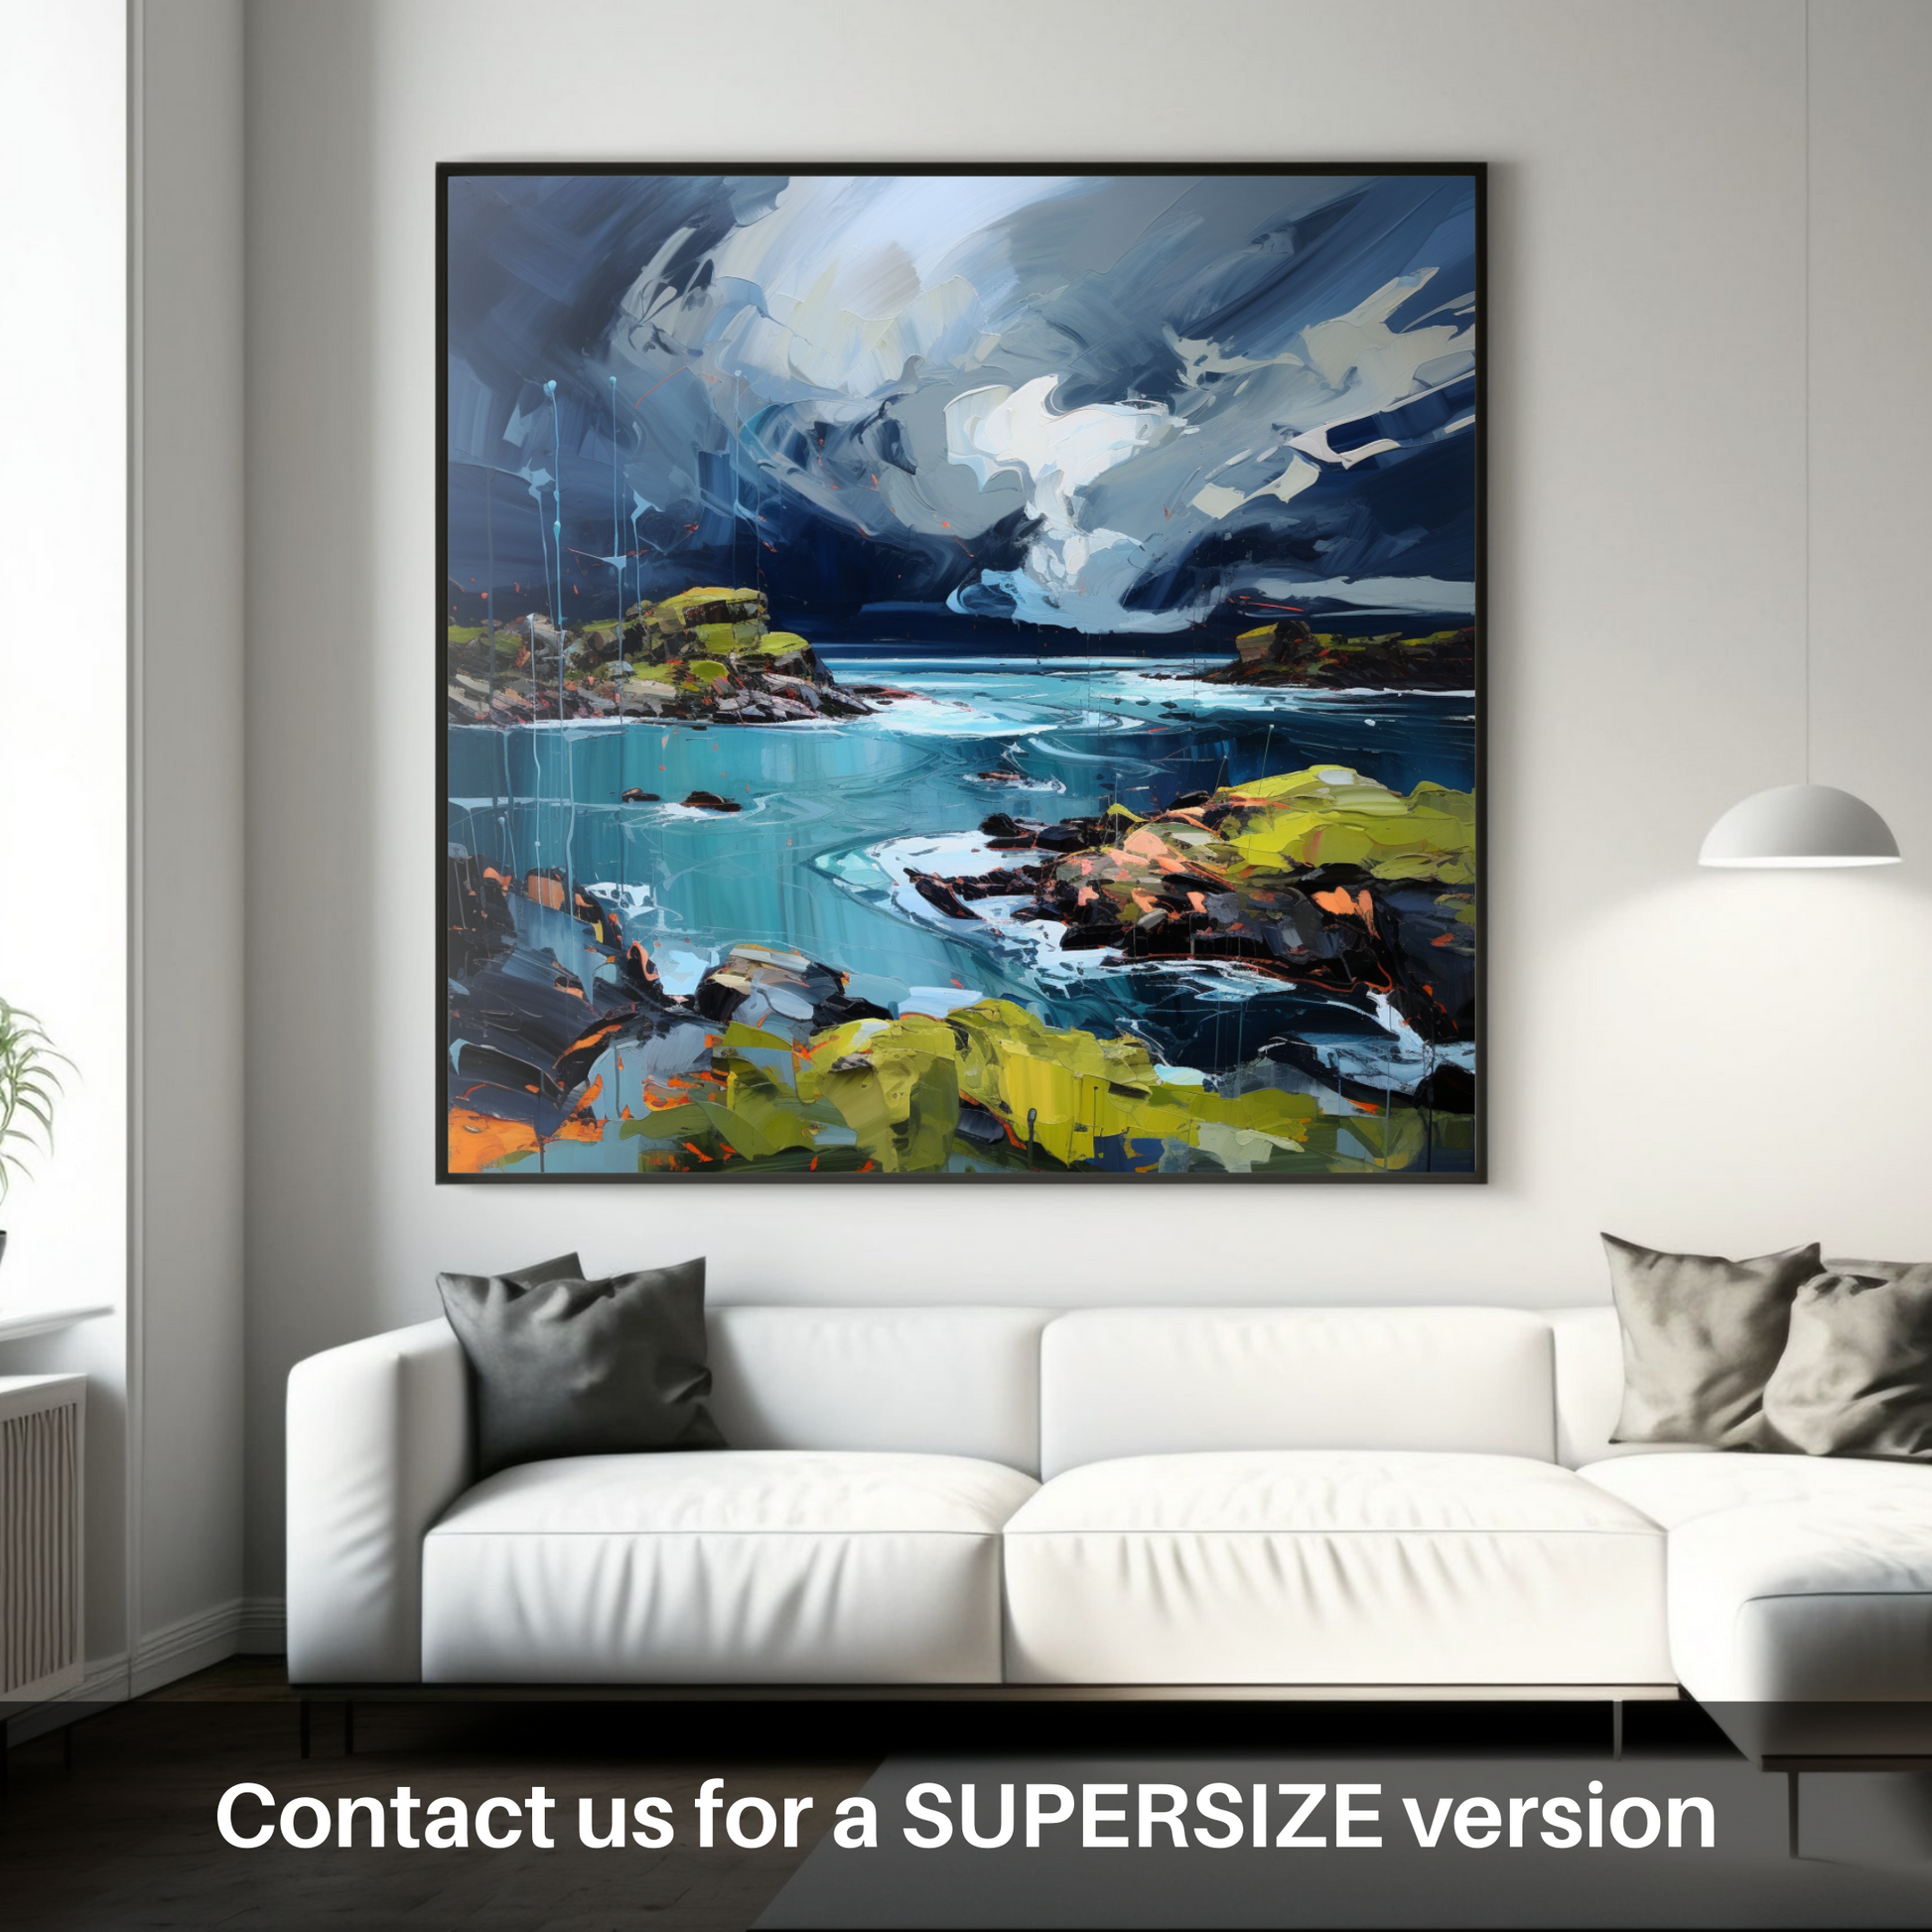 Huge supersize print of Ardalanish Bay with a stormy sky